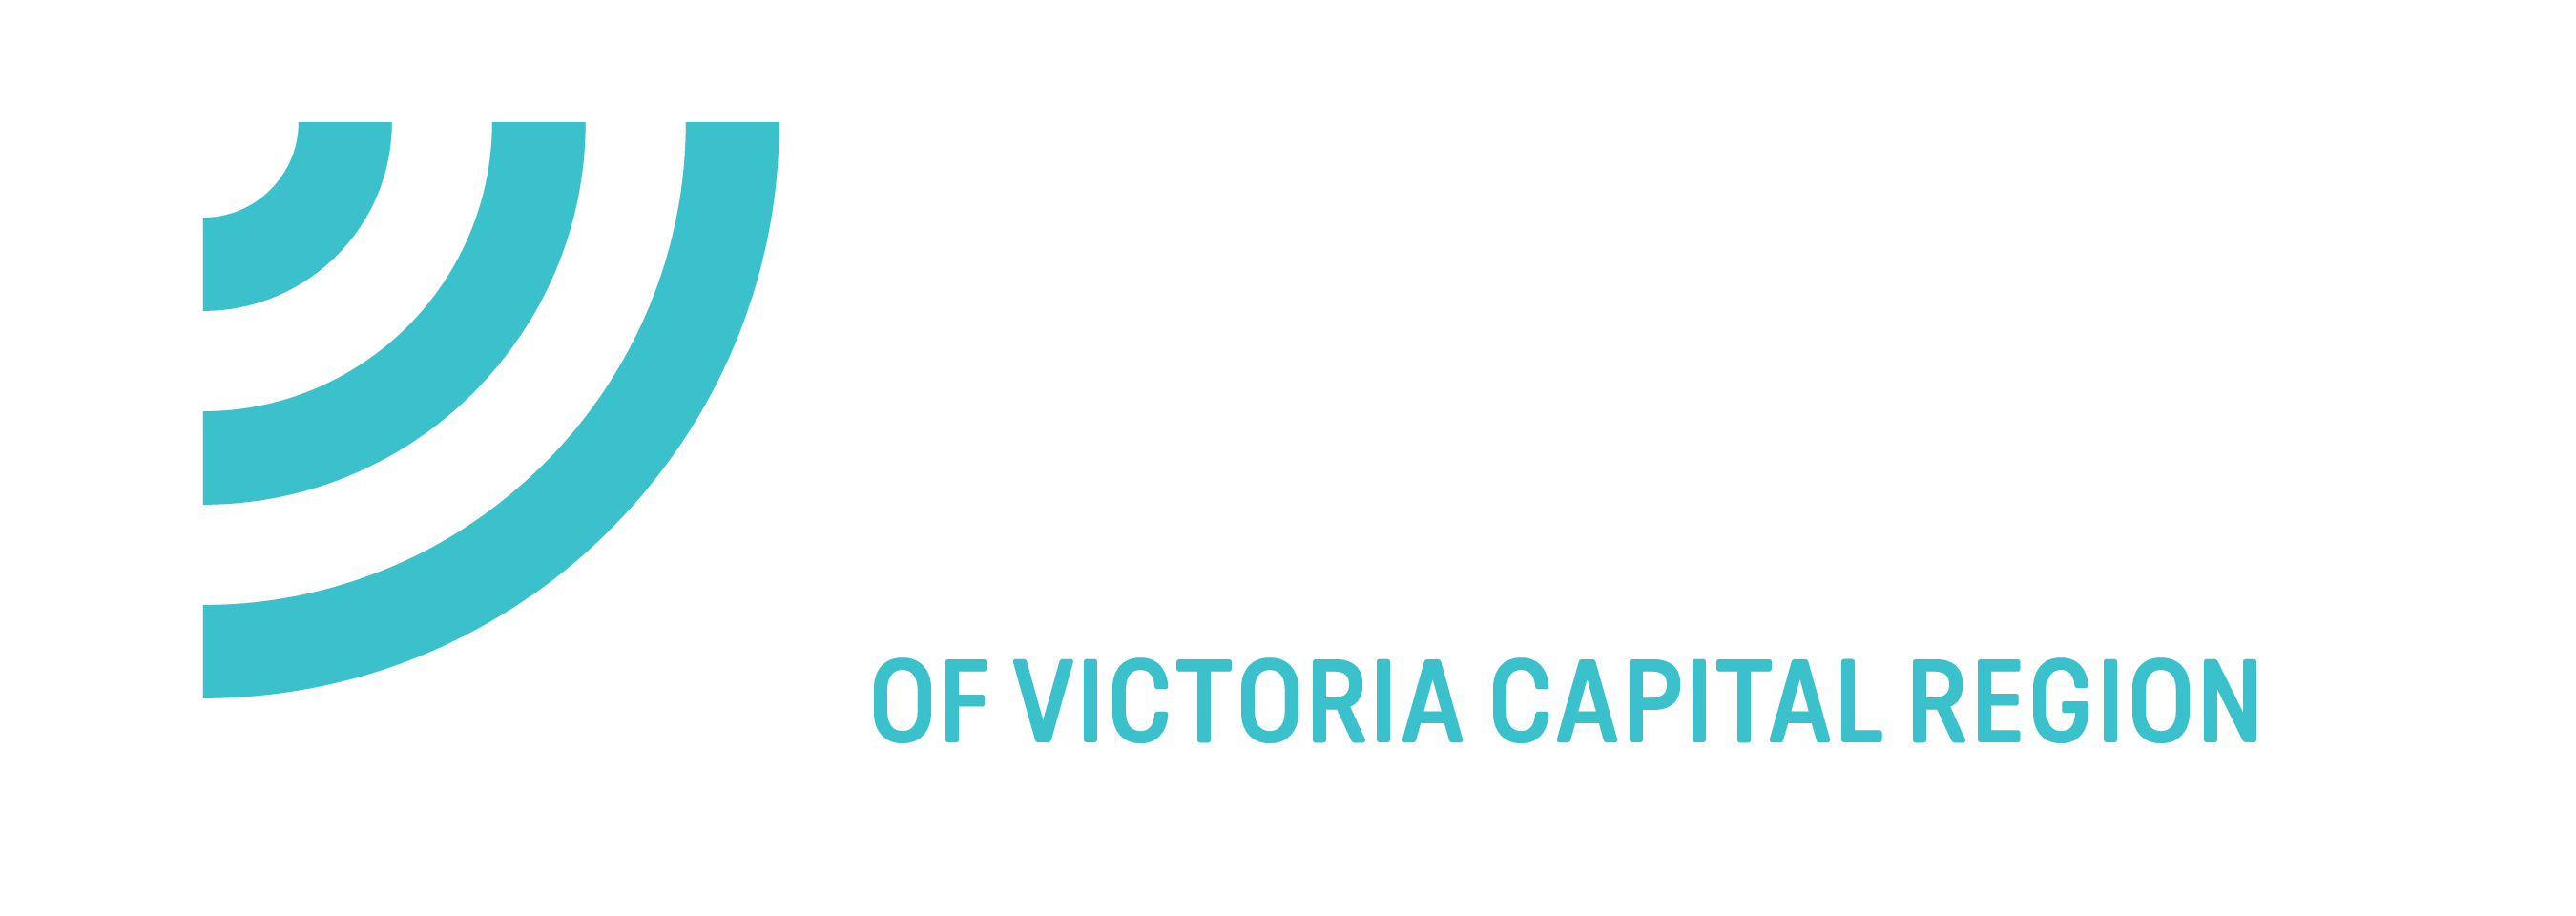 Resources for Mental Health - Big Brothers Big Sisters of Victoria Capital Region